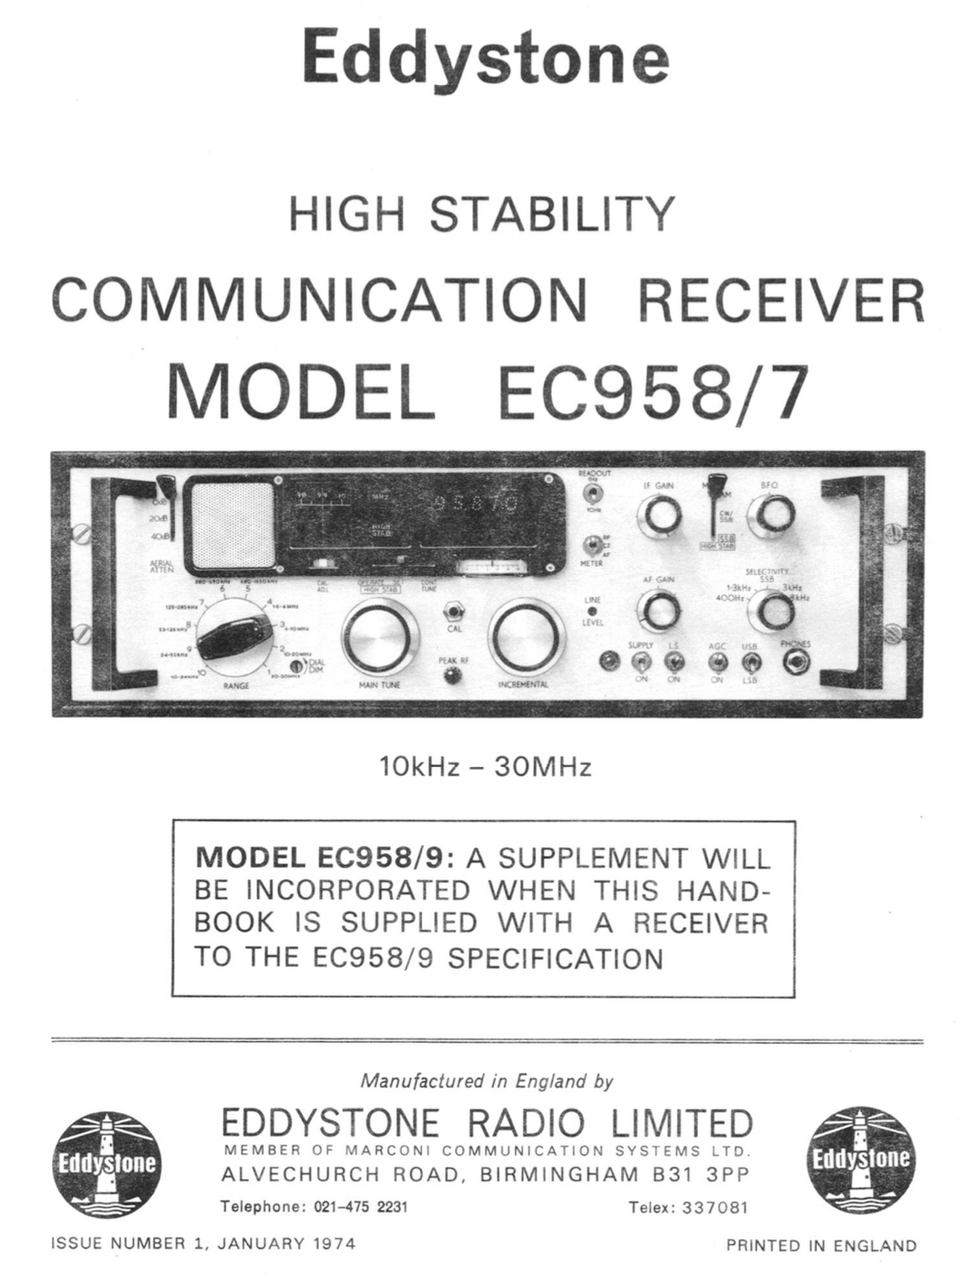 Eddystone Type EC958/7 High Stability Communications Receiverer - Service Manual